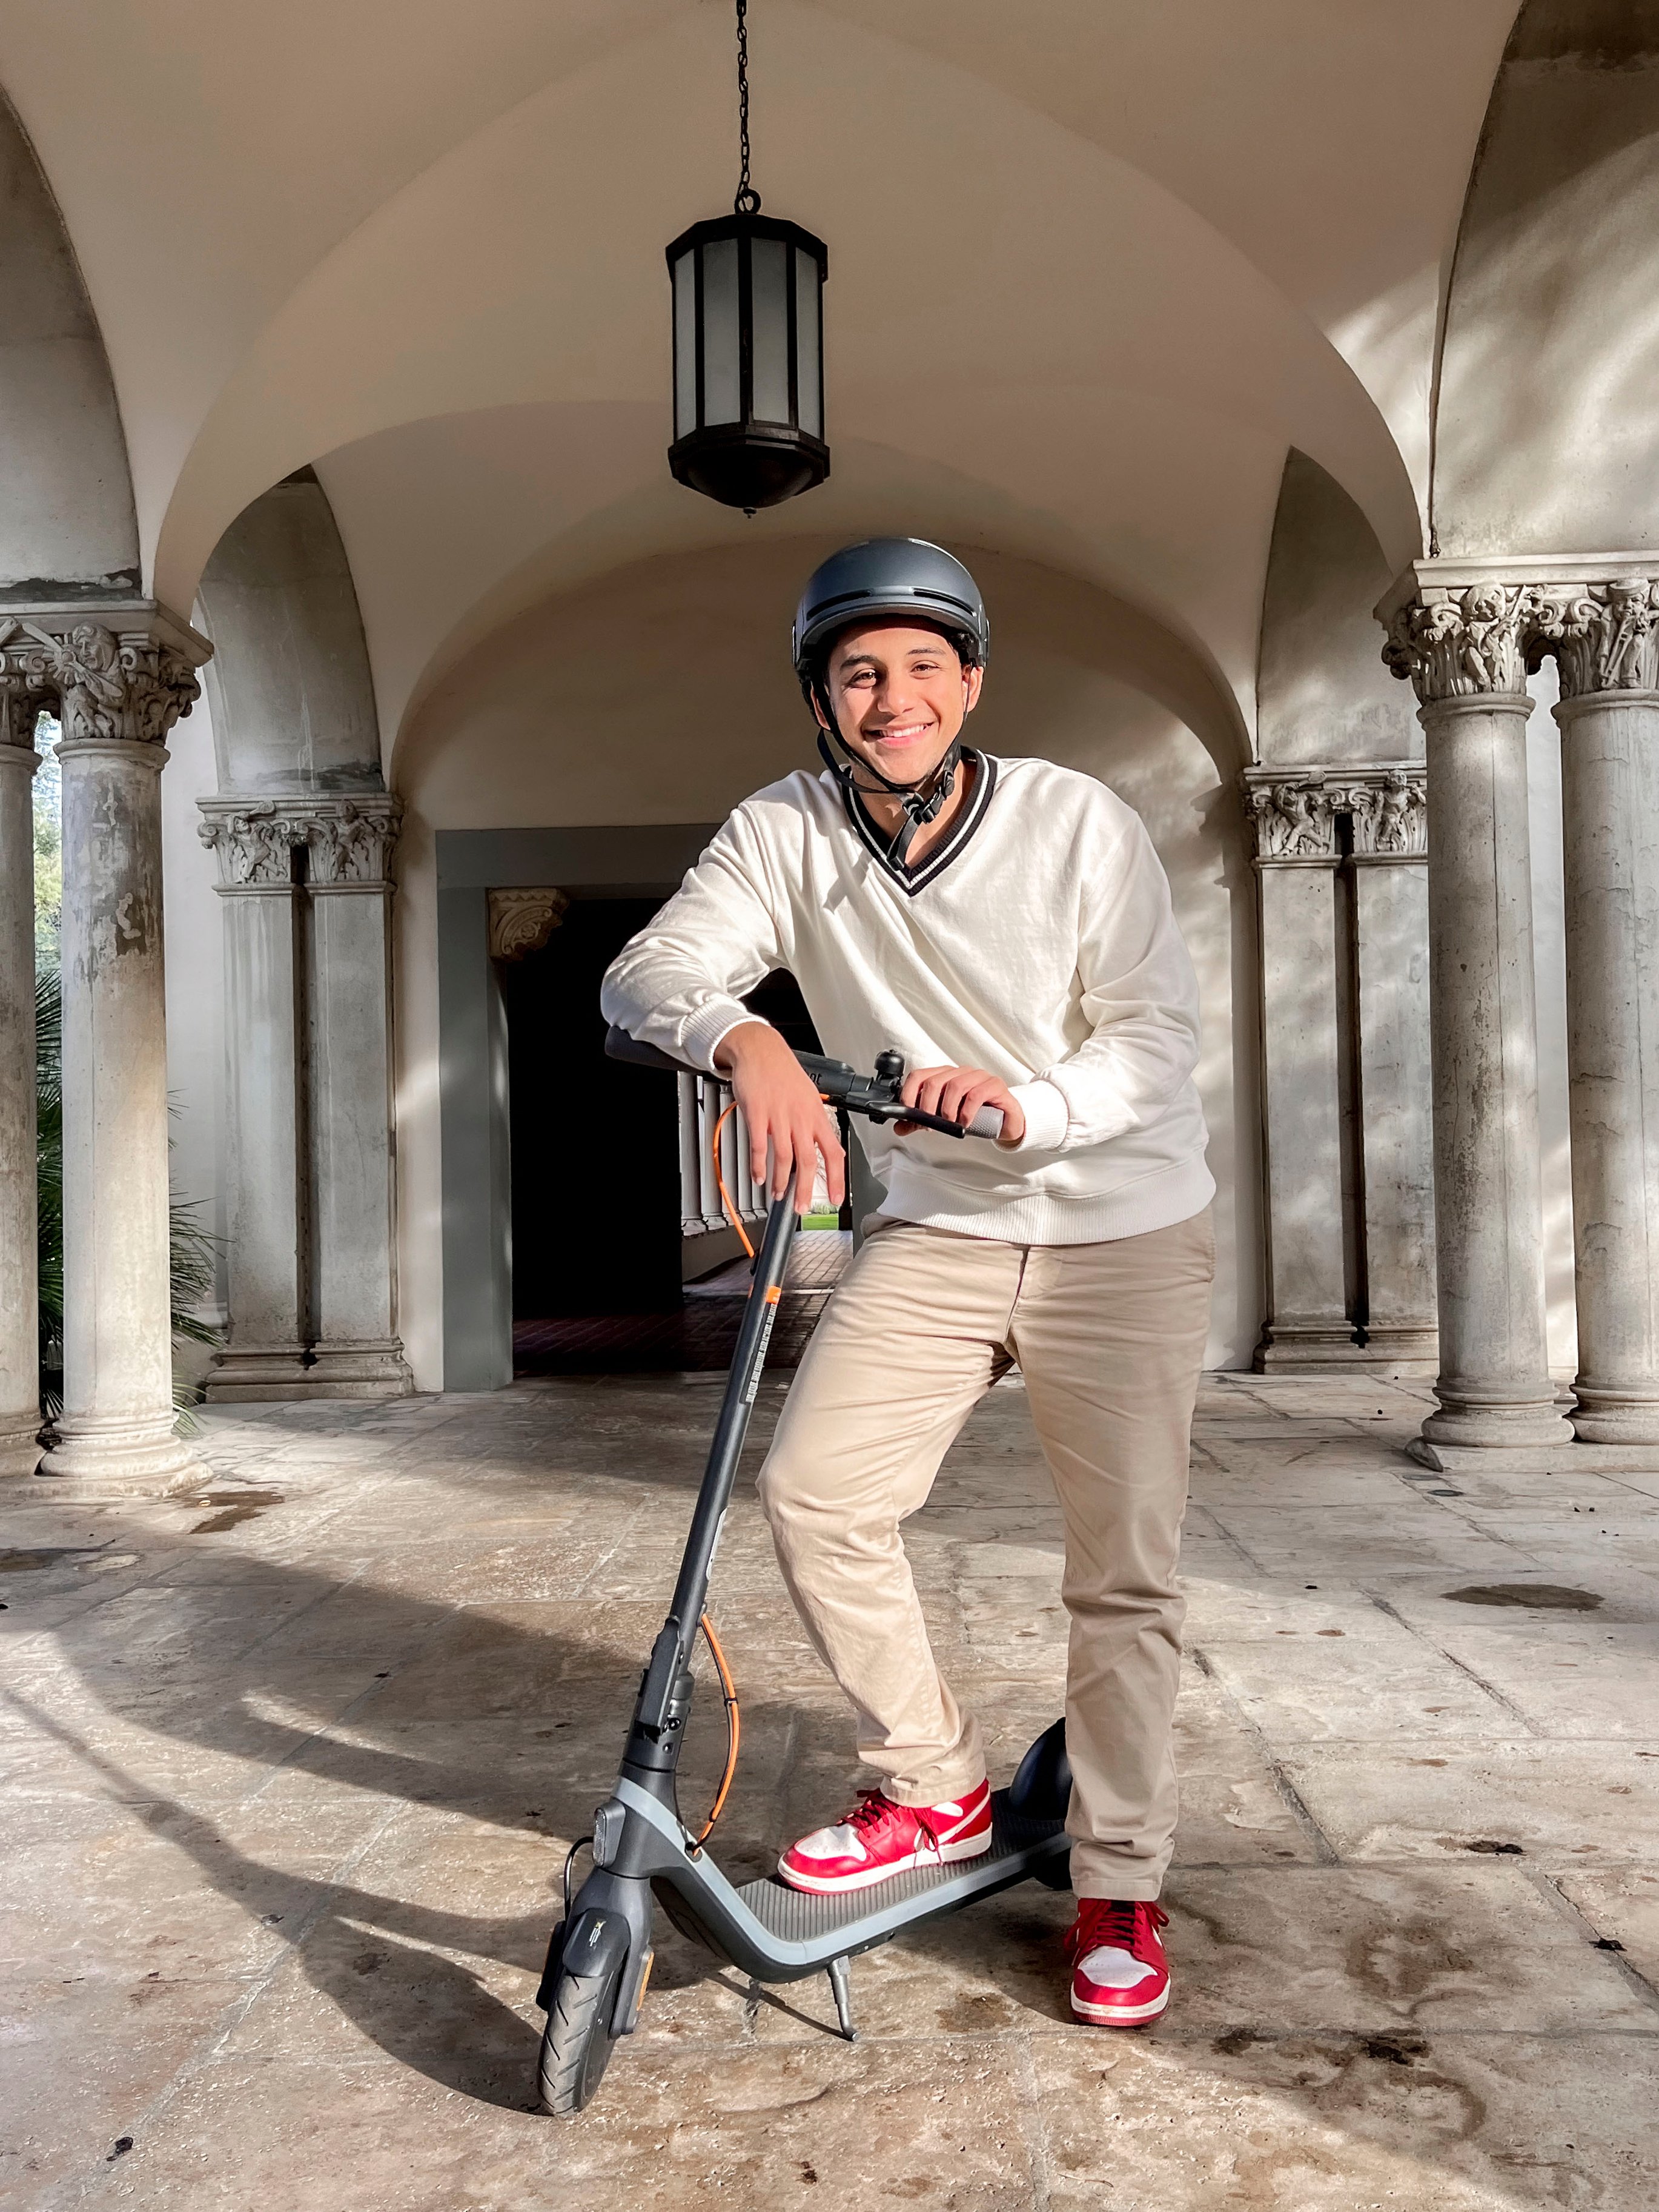 Segway E2 Plus Electric Scooter - Black : Target